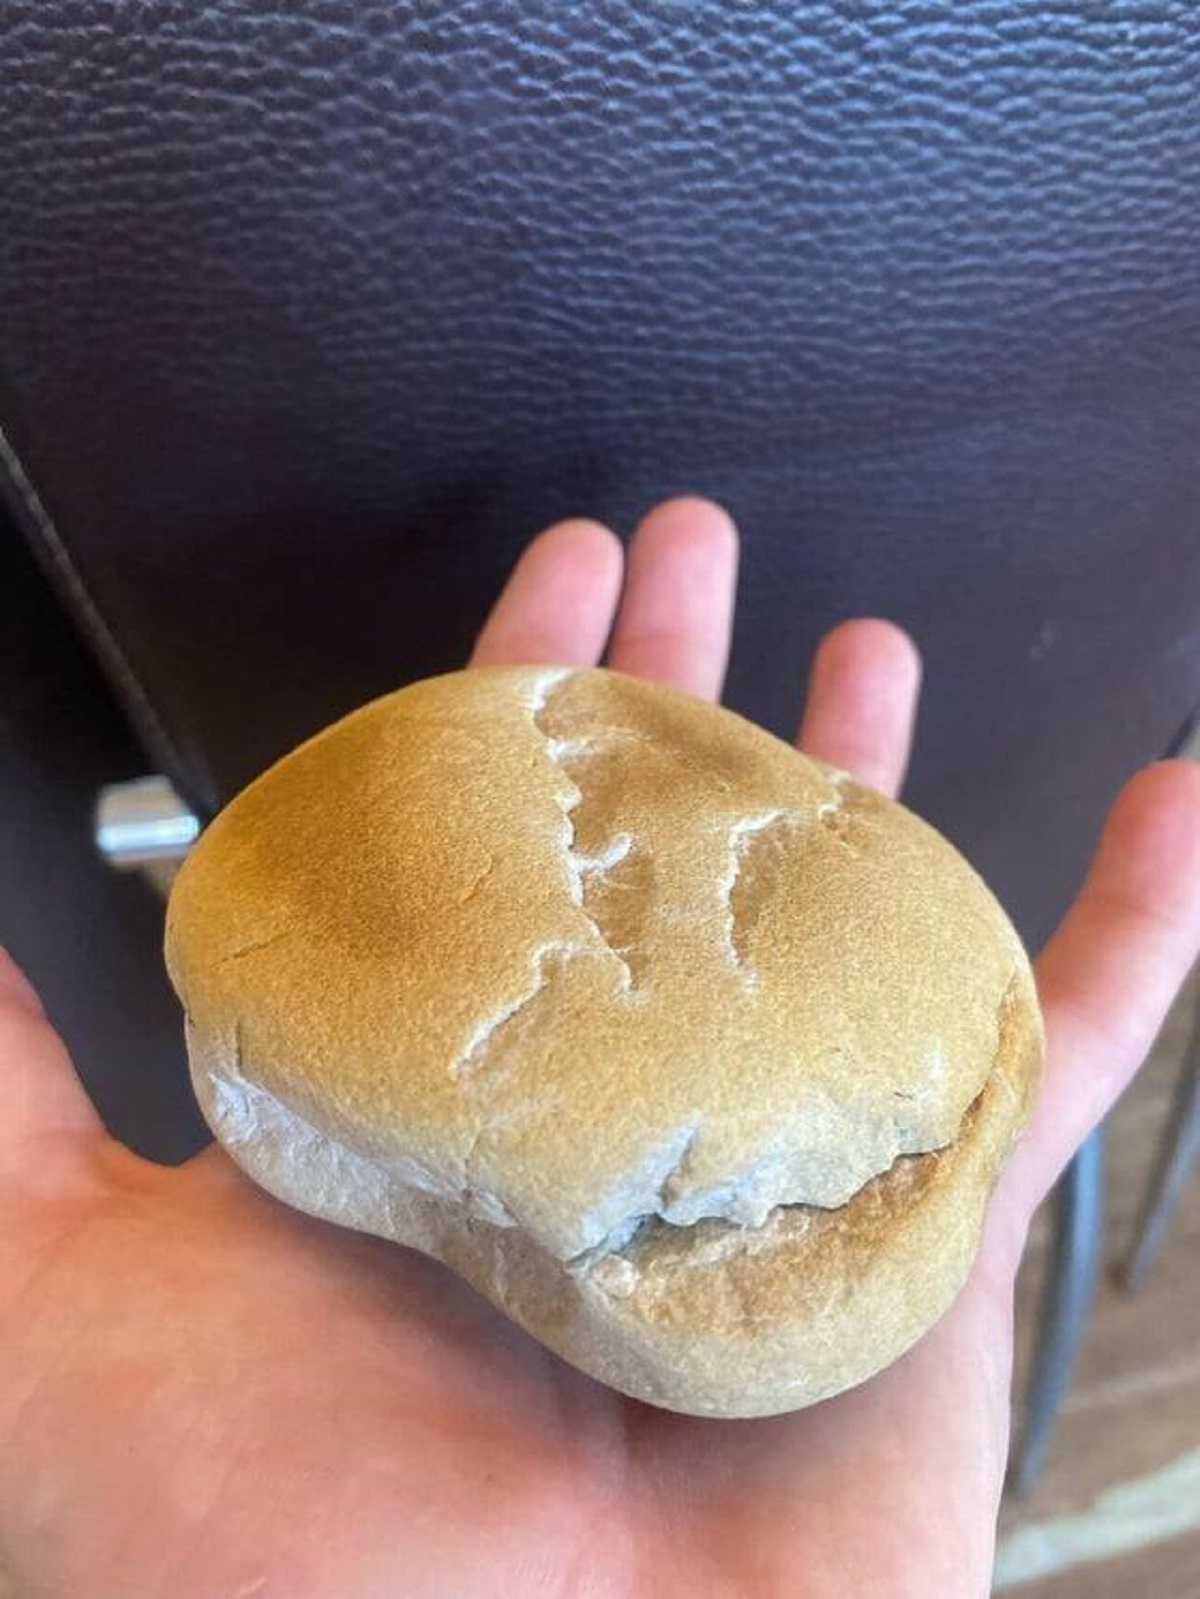 "A rock I found on the beach looks exactly like a bread roll/bap/etc."